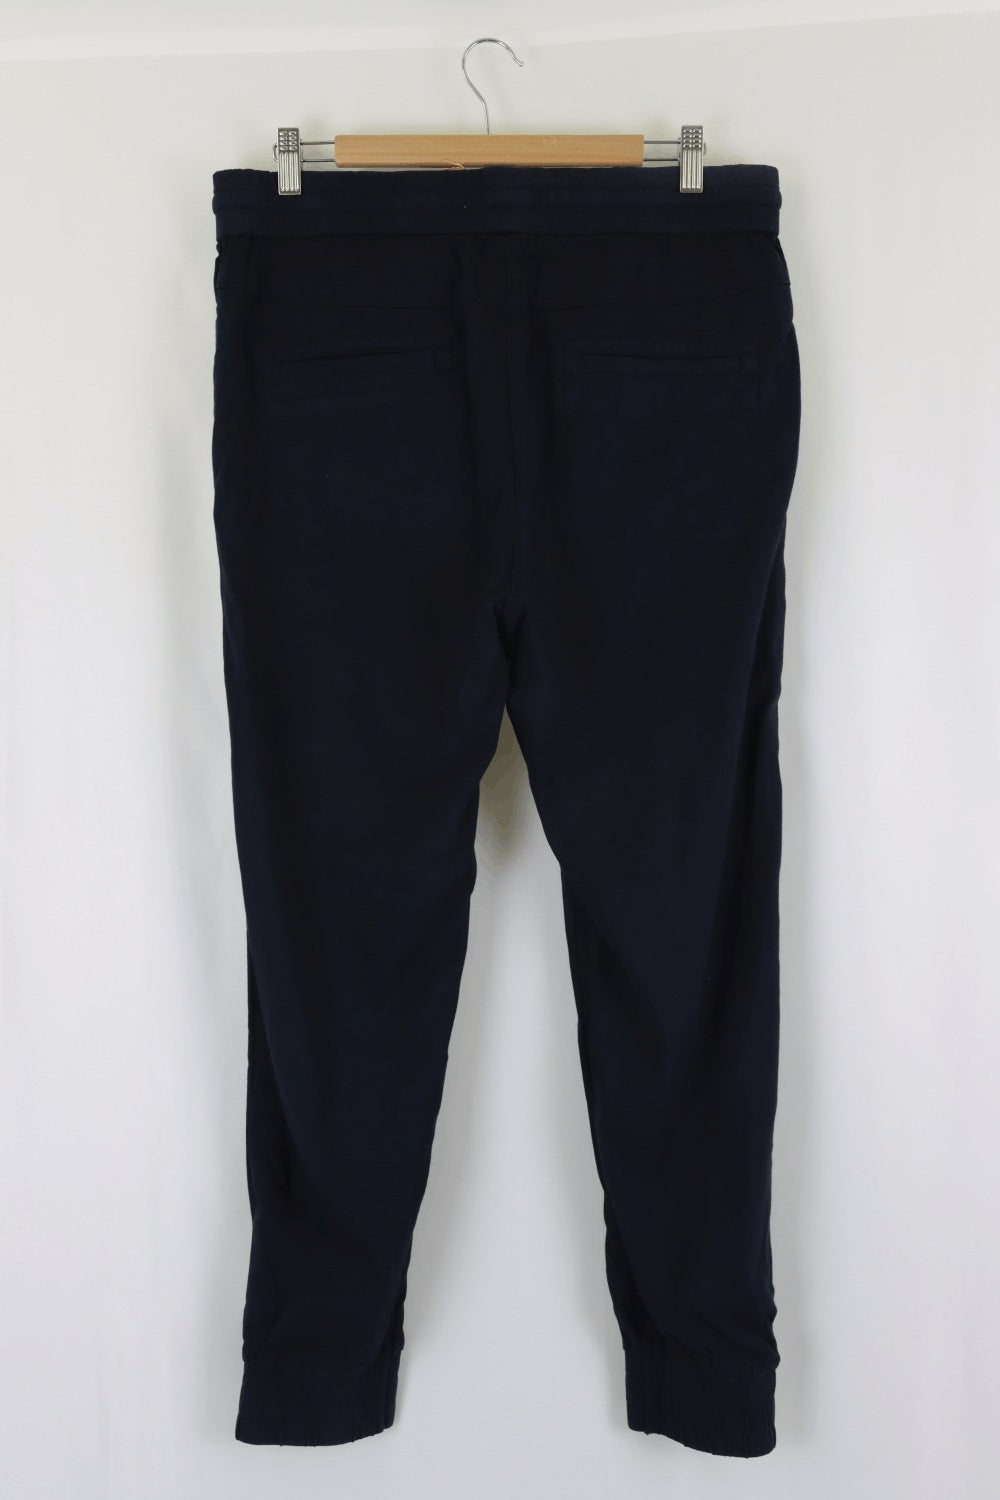 Country Road Blue Pants S